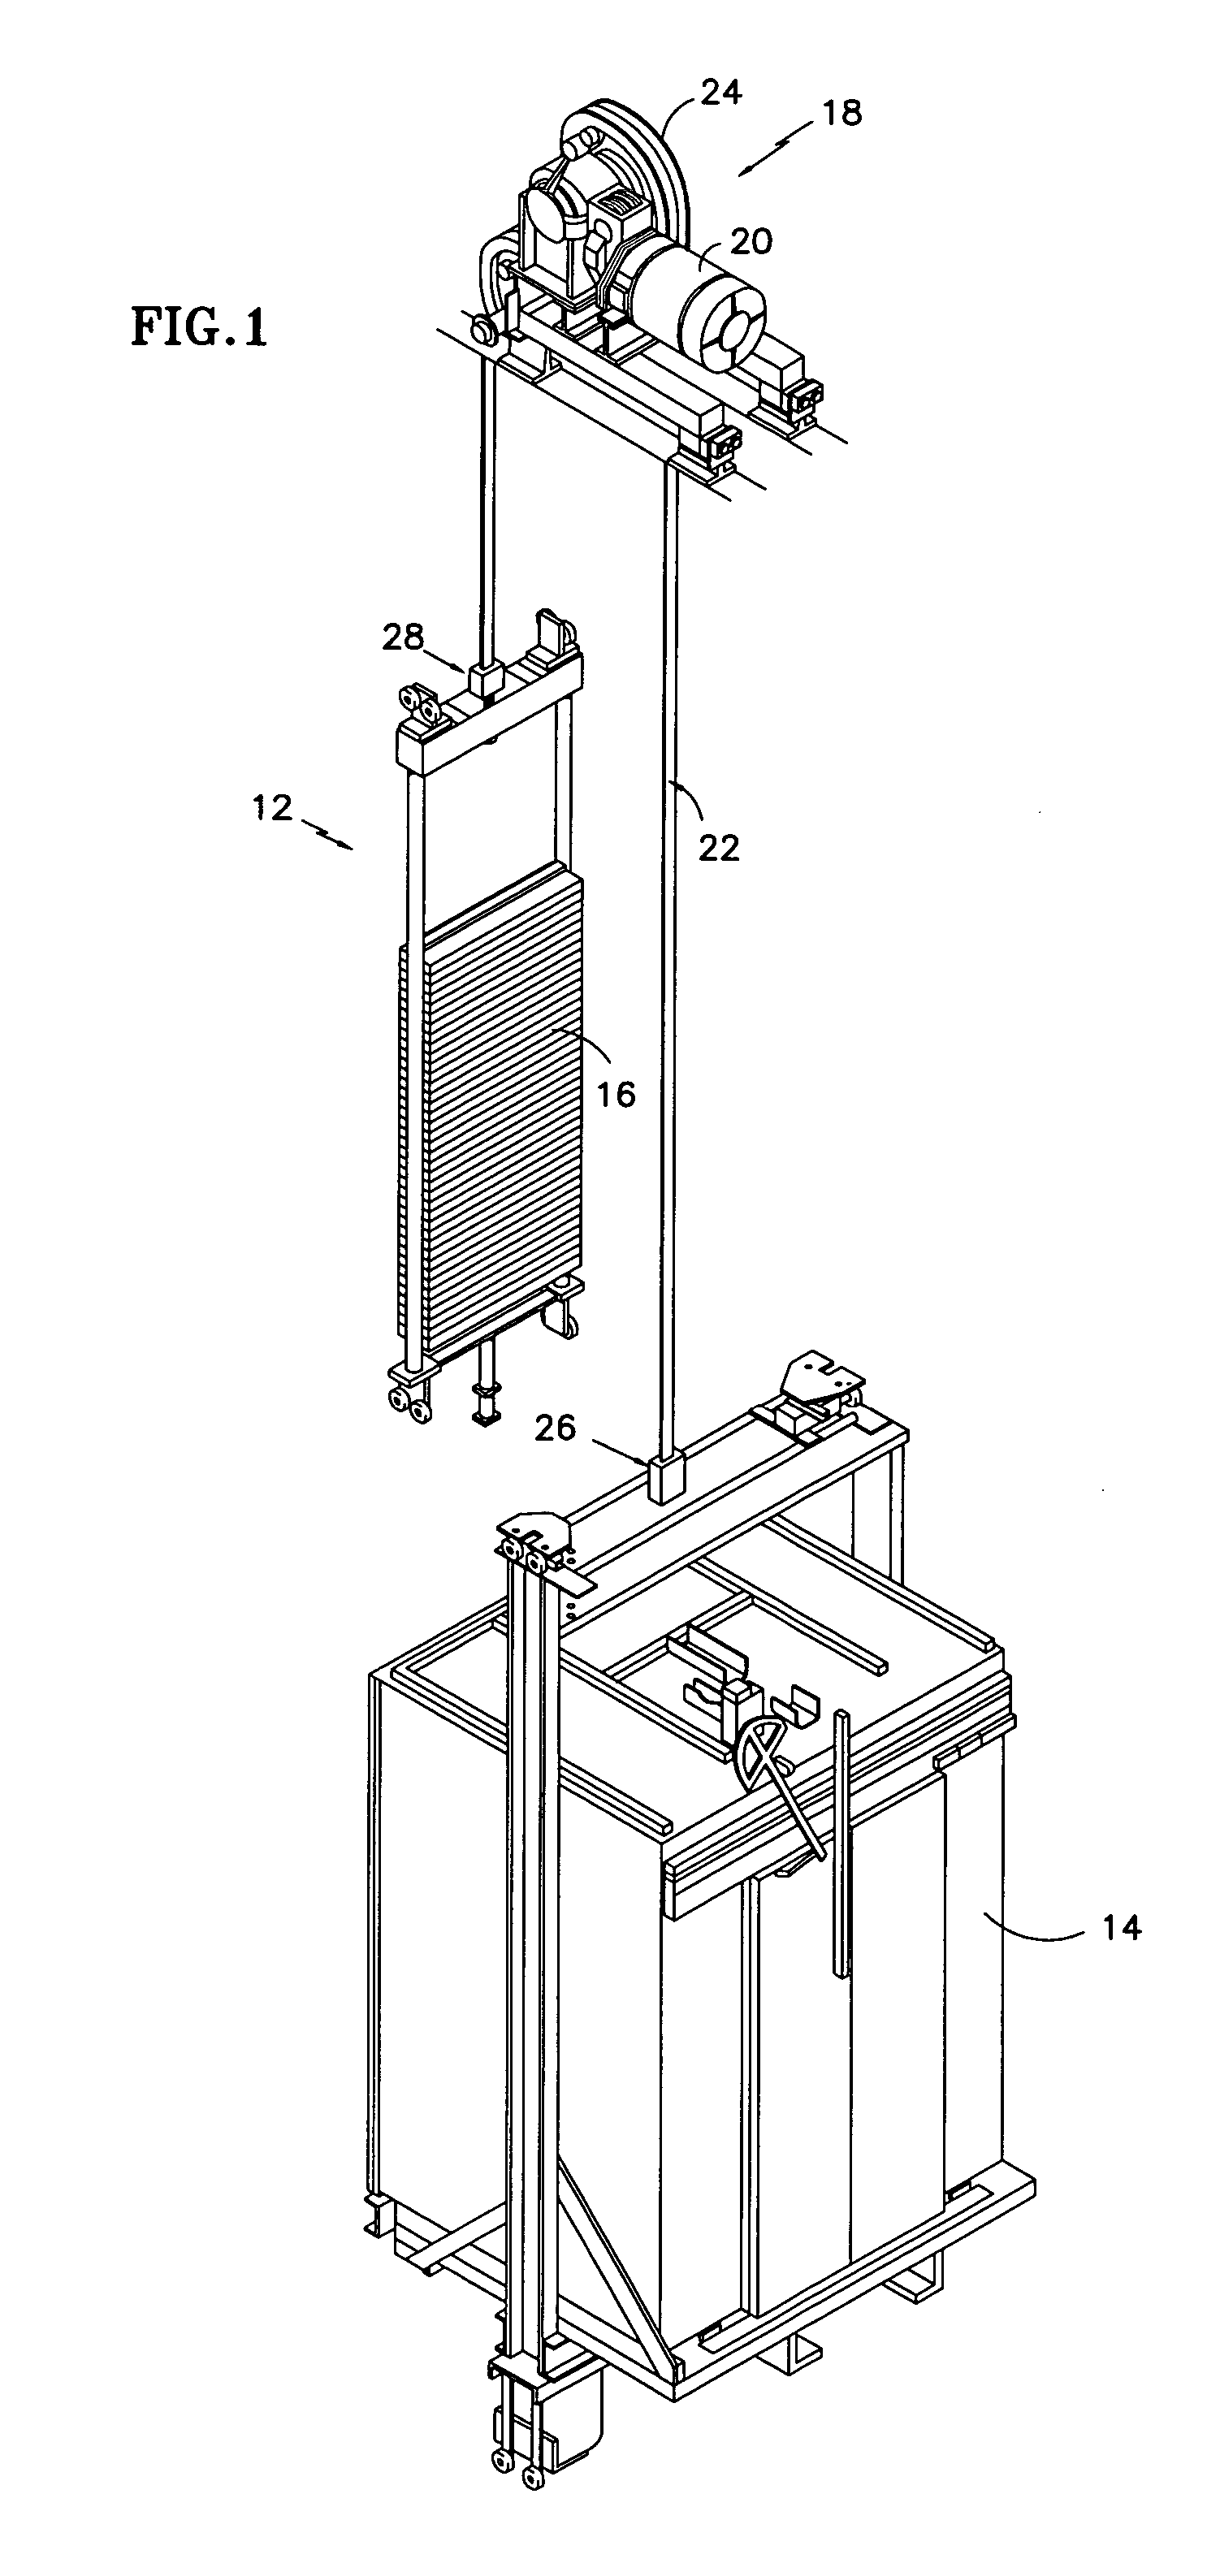 Traction enhanced controlled pressure flexible flat tension member termination device